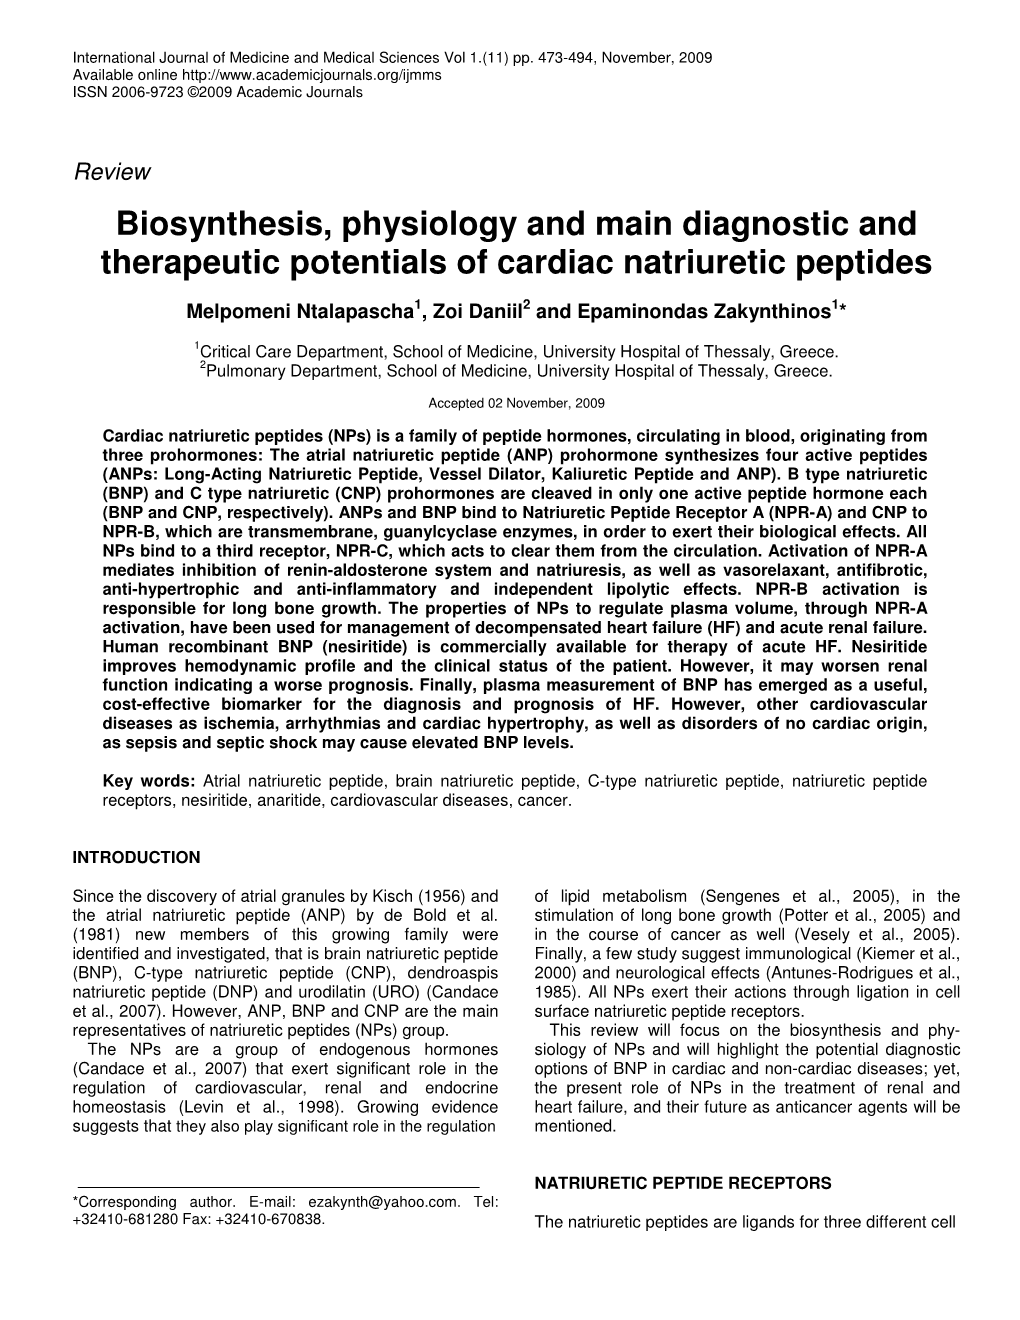 Biosynthesis, Physiology and Main Diagnostic and Therapeutic Potentials of Cardiac Natriuretic Peptides